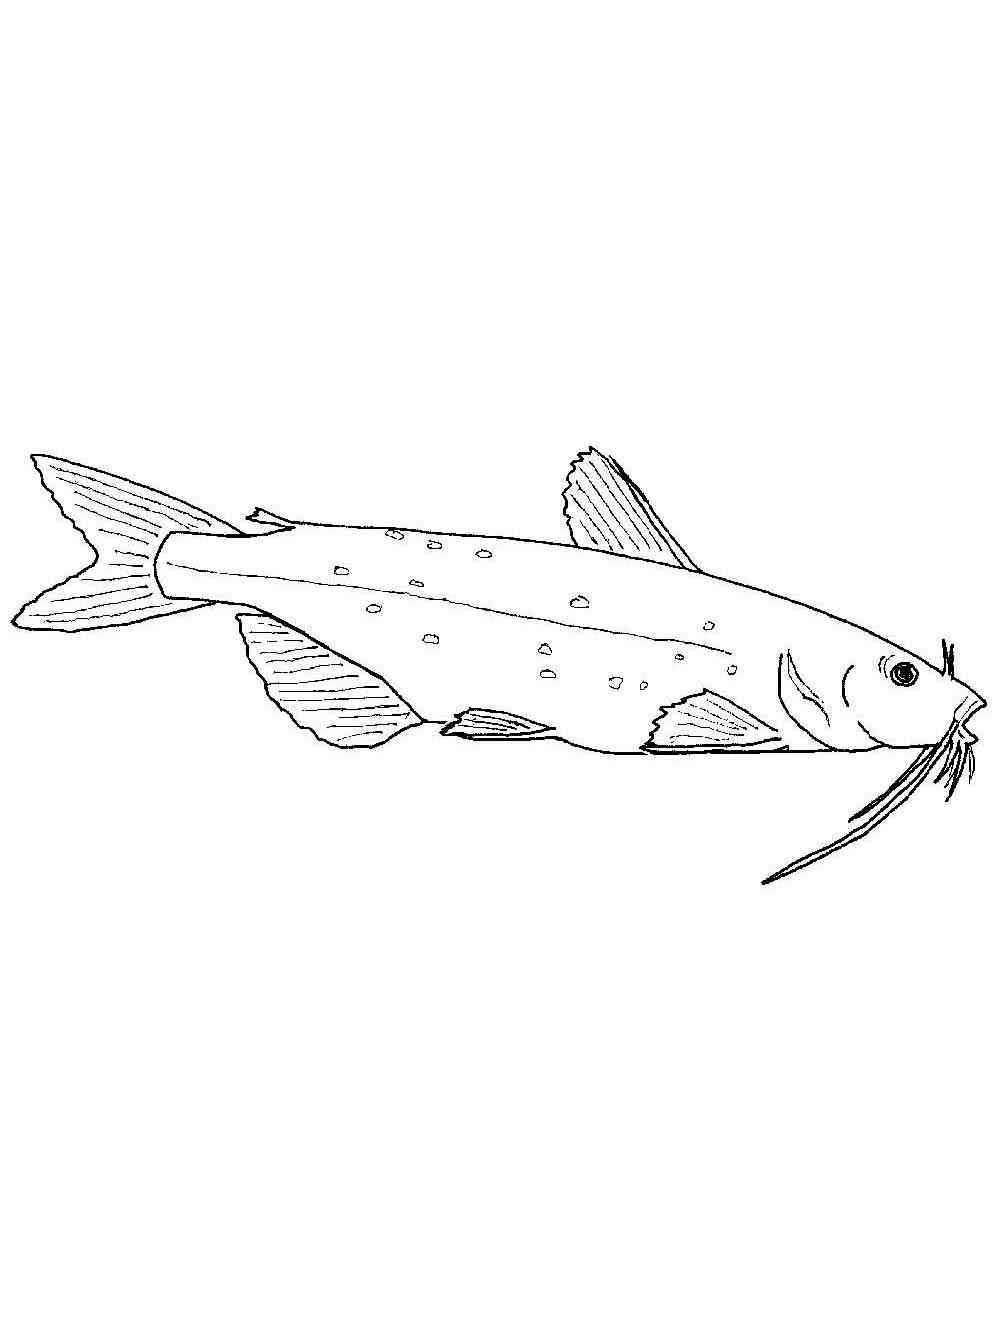 Catfish 16 coloring page